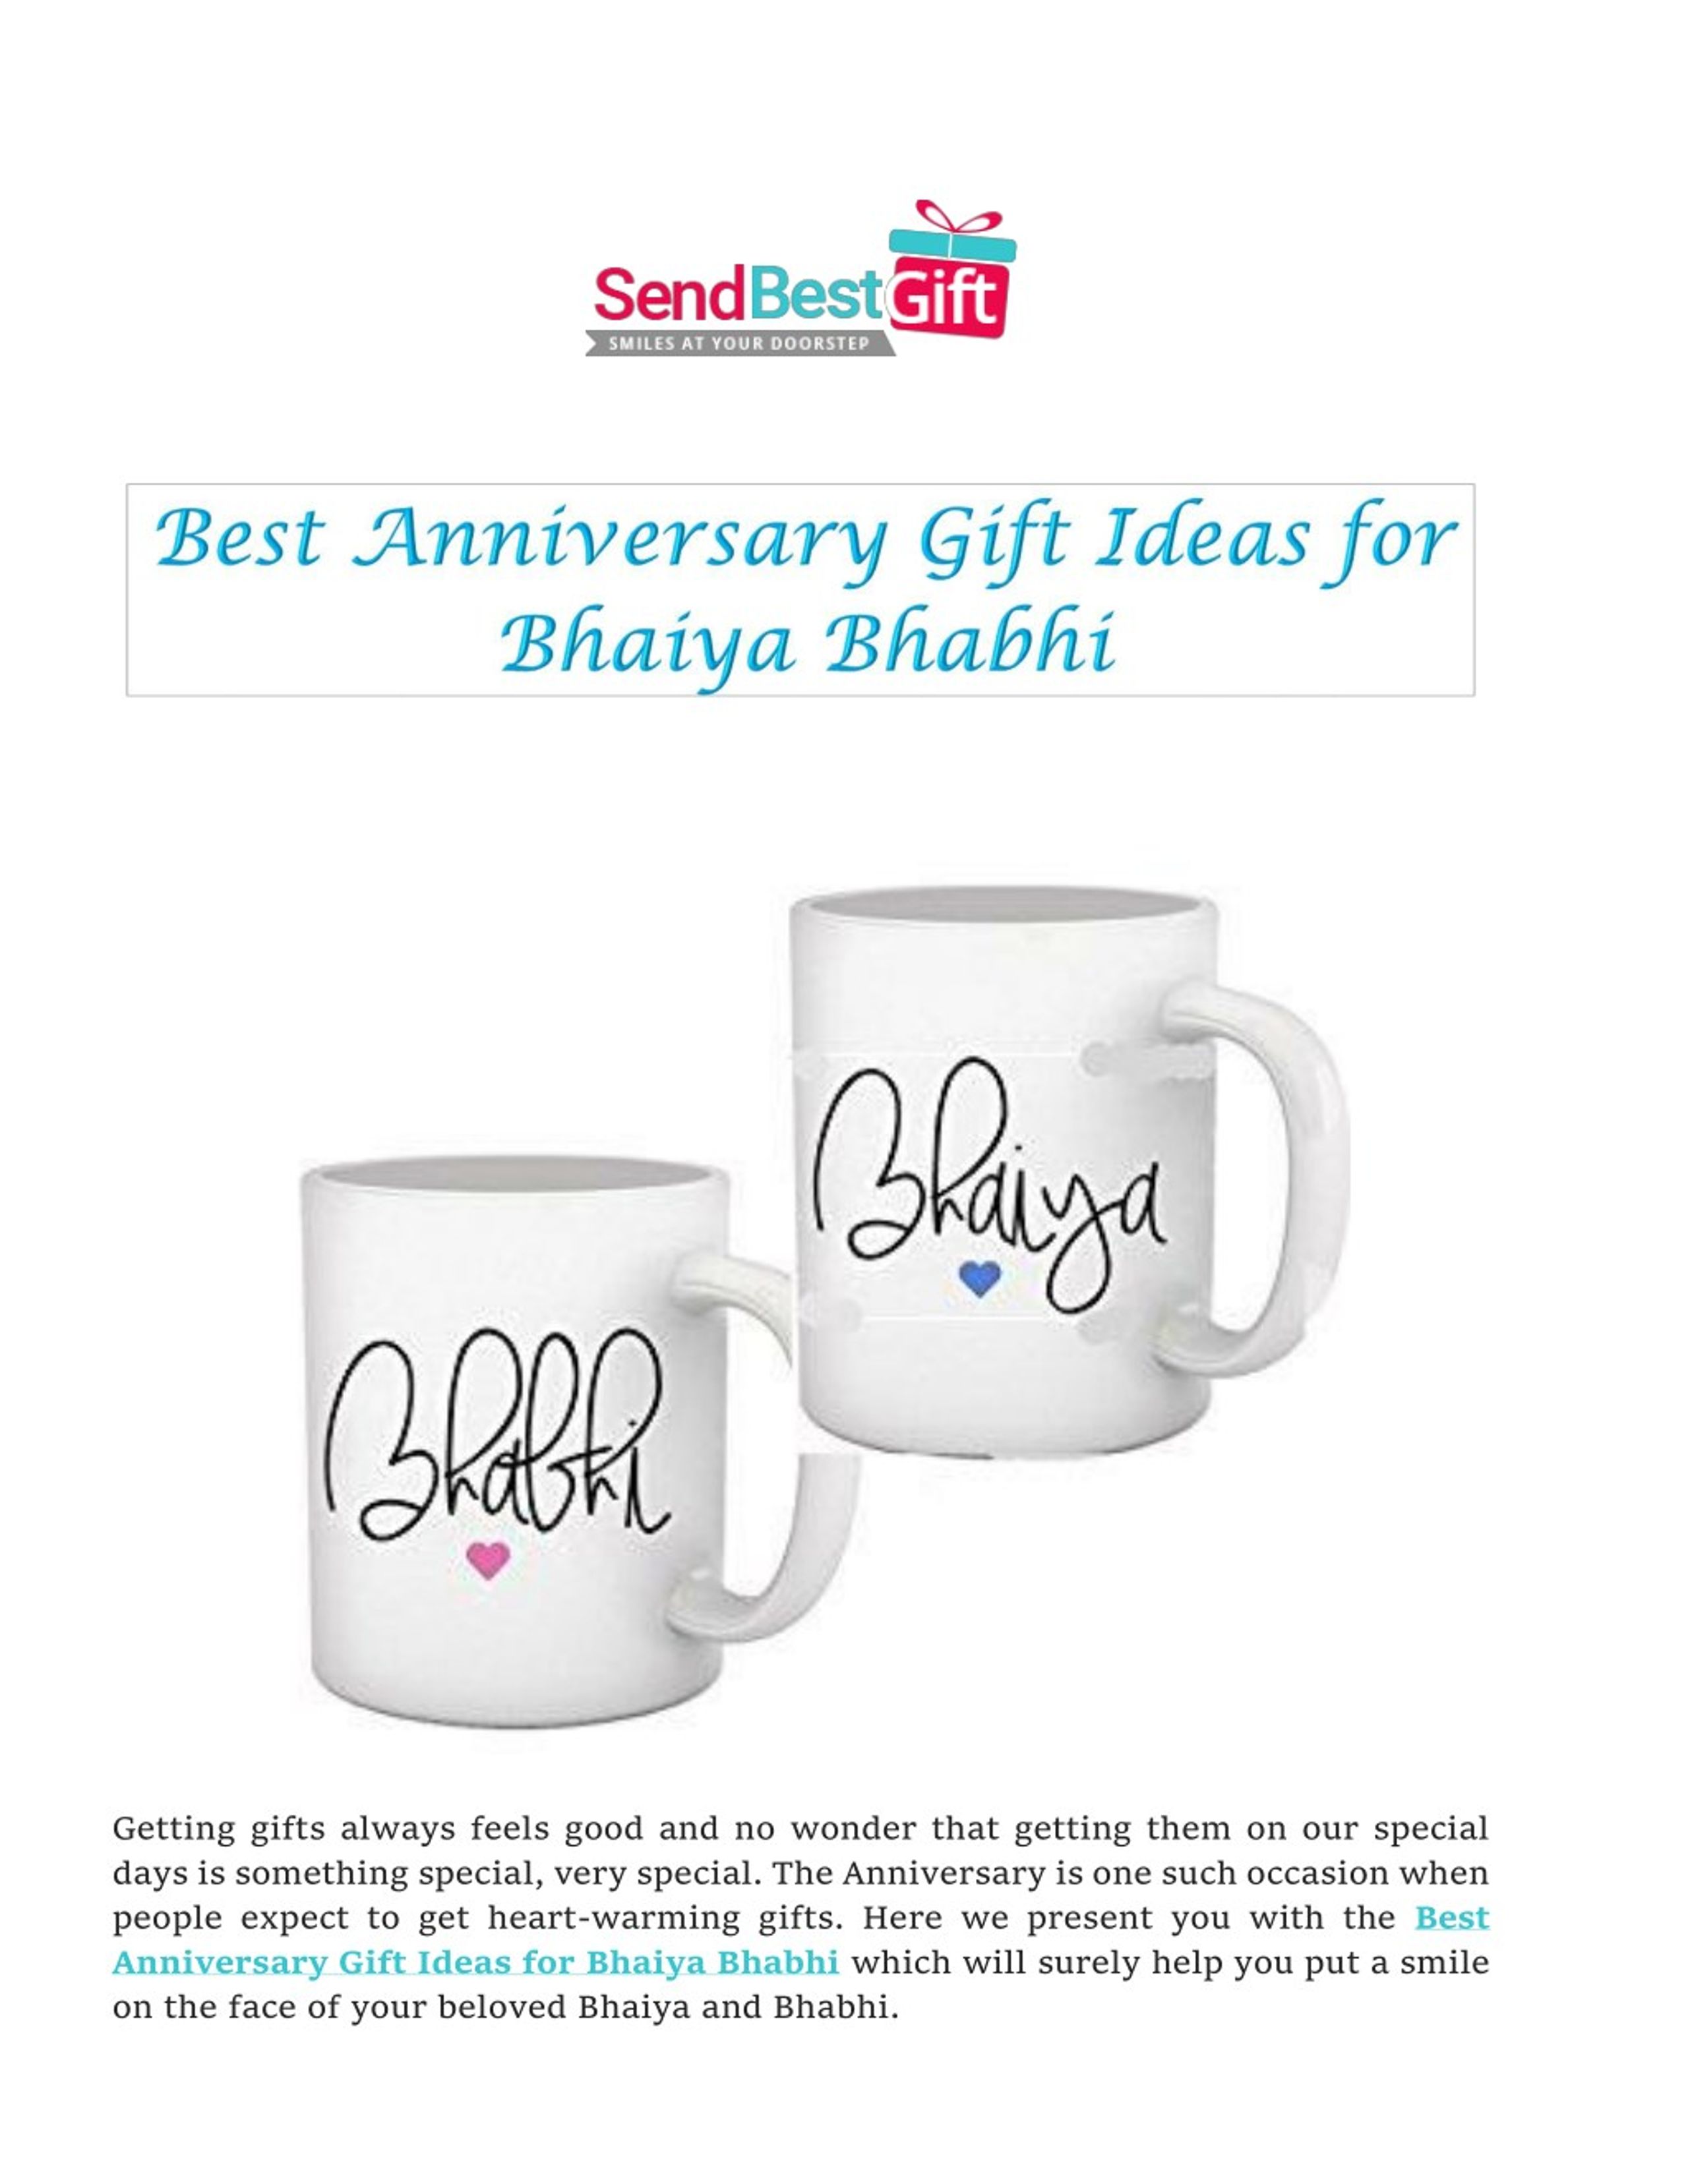 Unique friendship day gifts ideas for friendship day by Send Best Gift -  Issuu